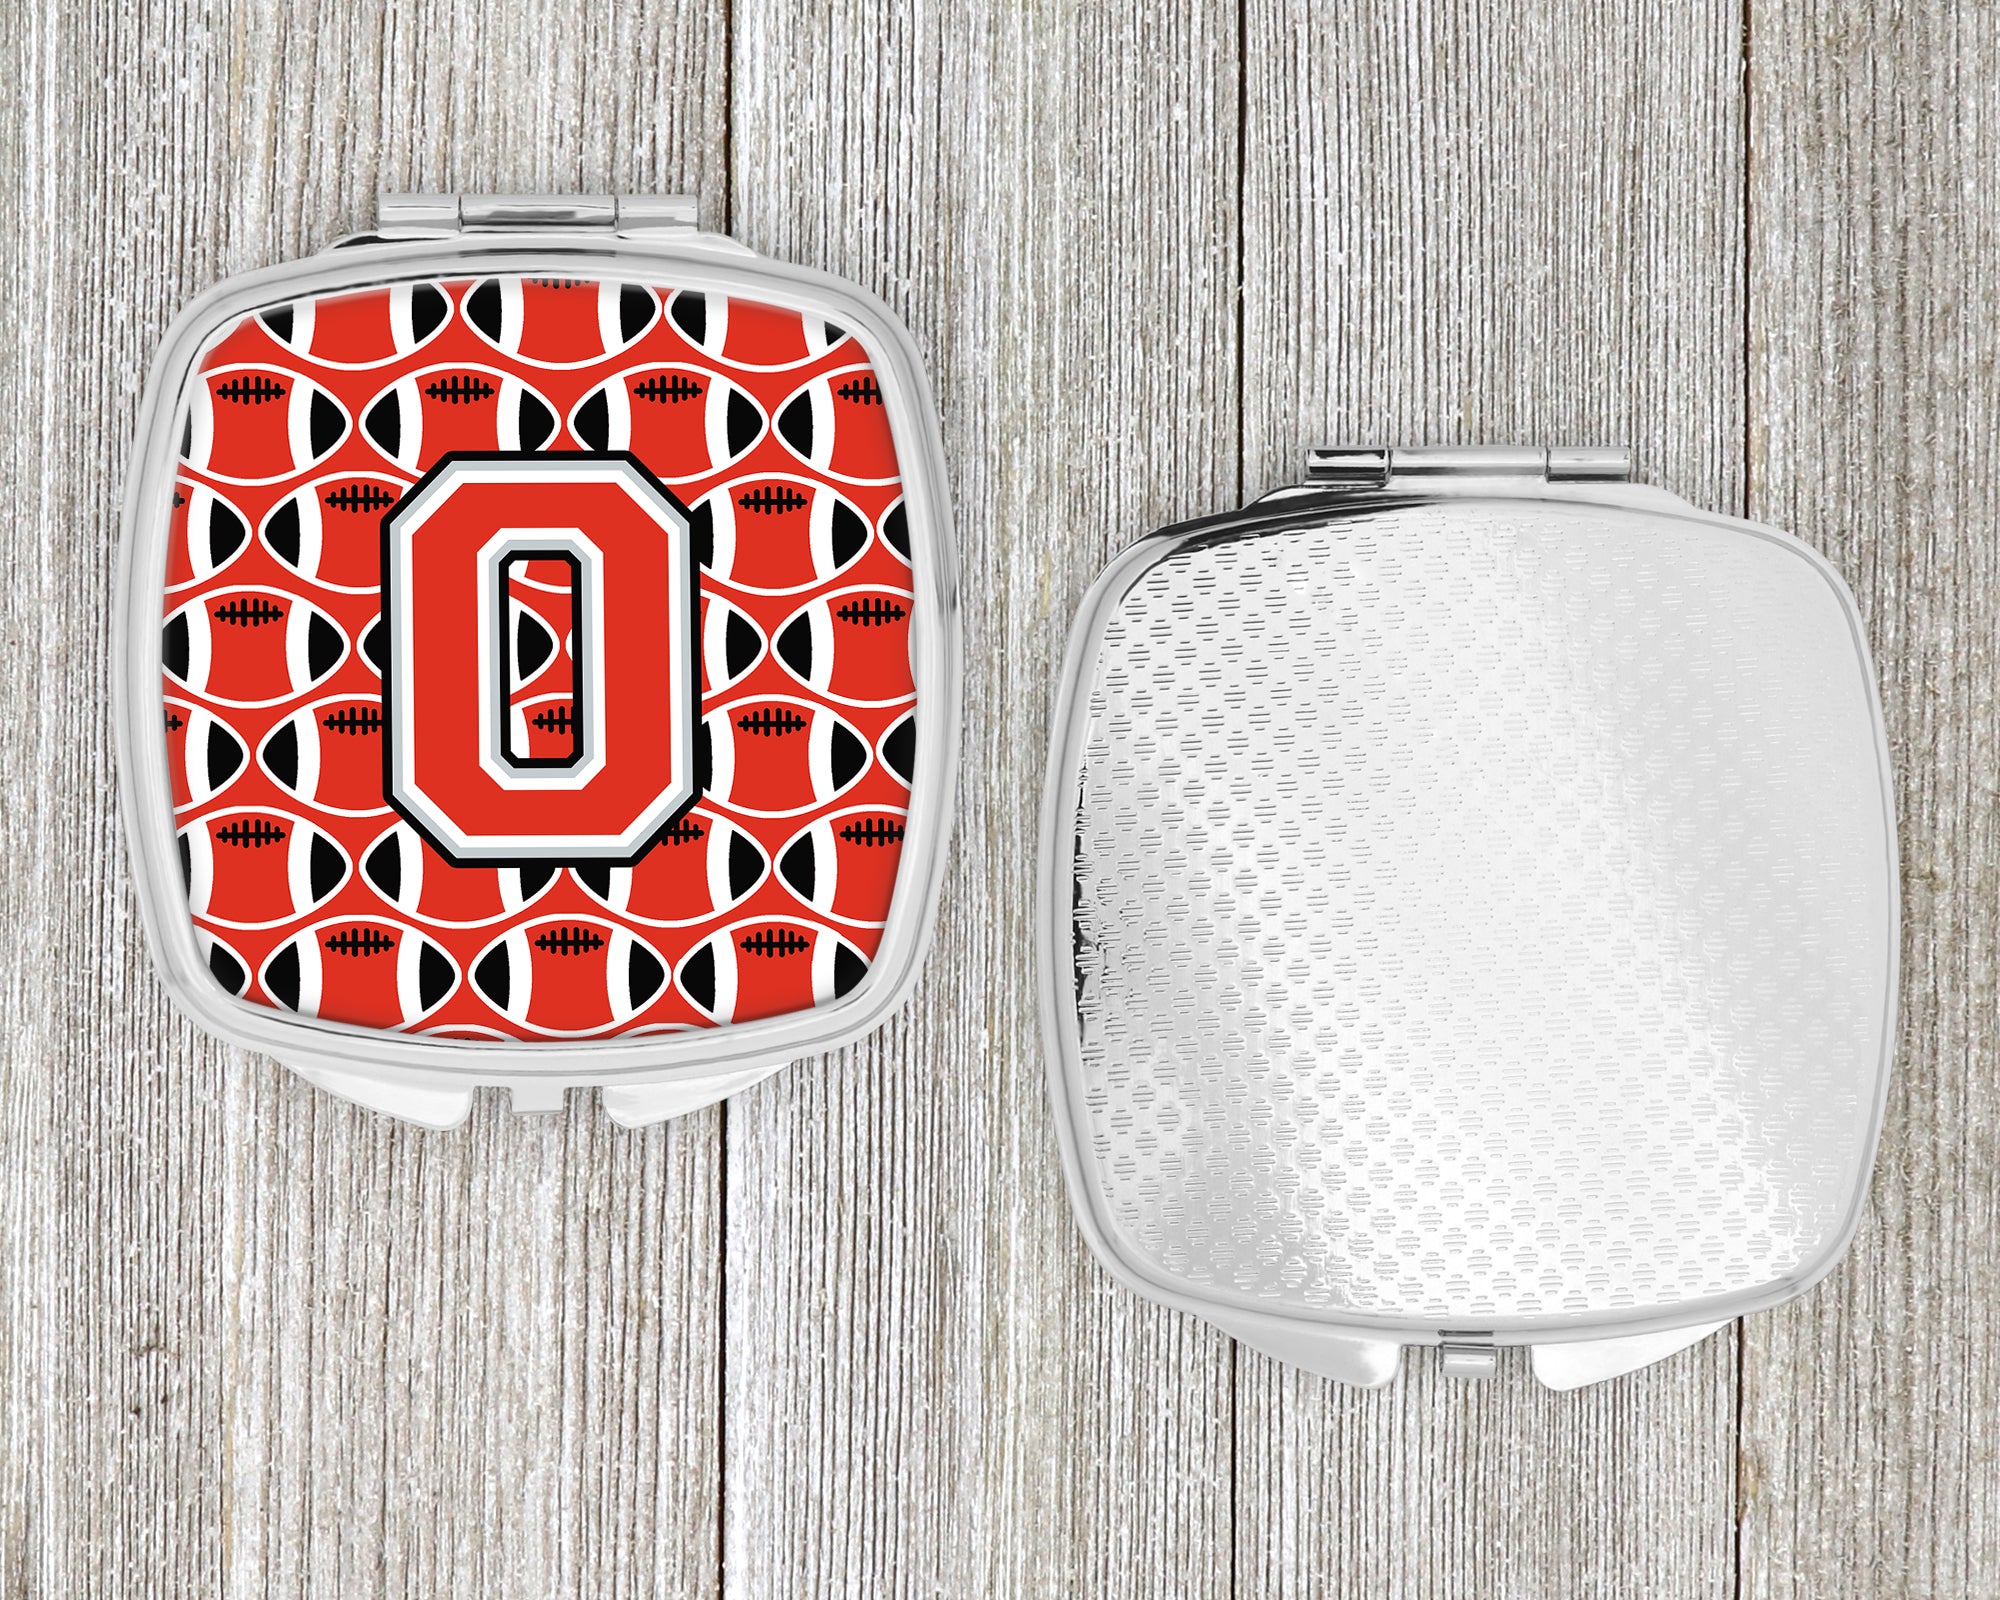 Letter O Football Scarlet and Grey Compact Mirror CJ1067-OSCM  the-store.com.